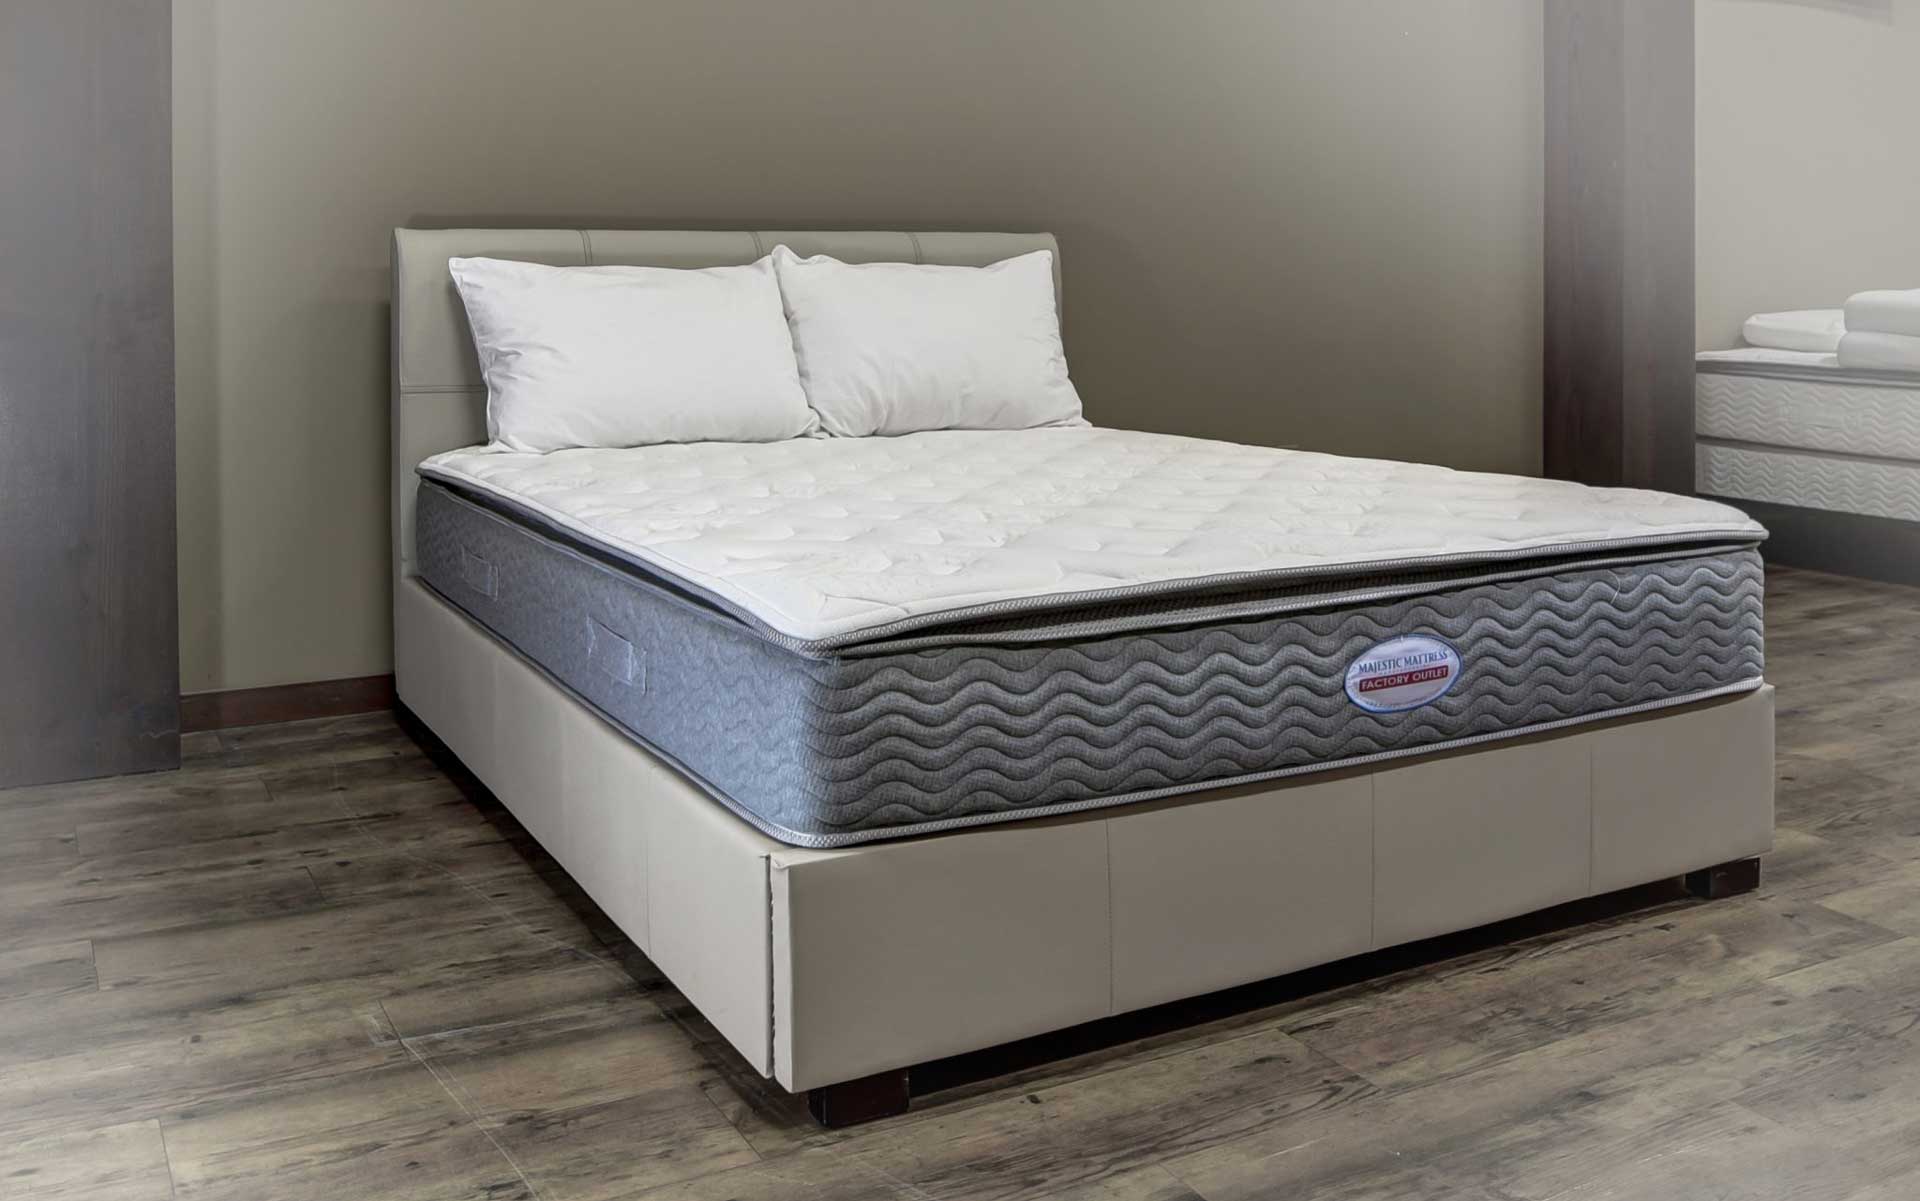 Find Mattresses in South Hill Washington